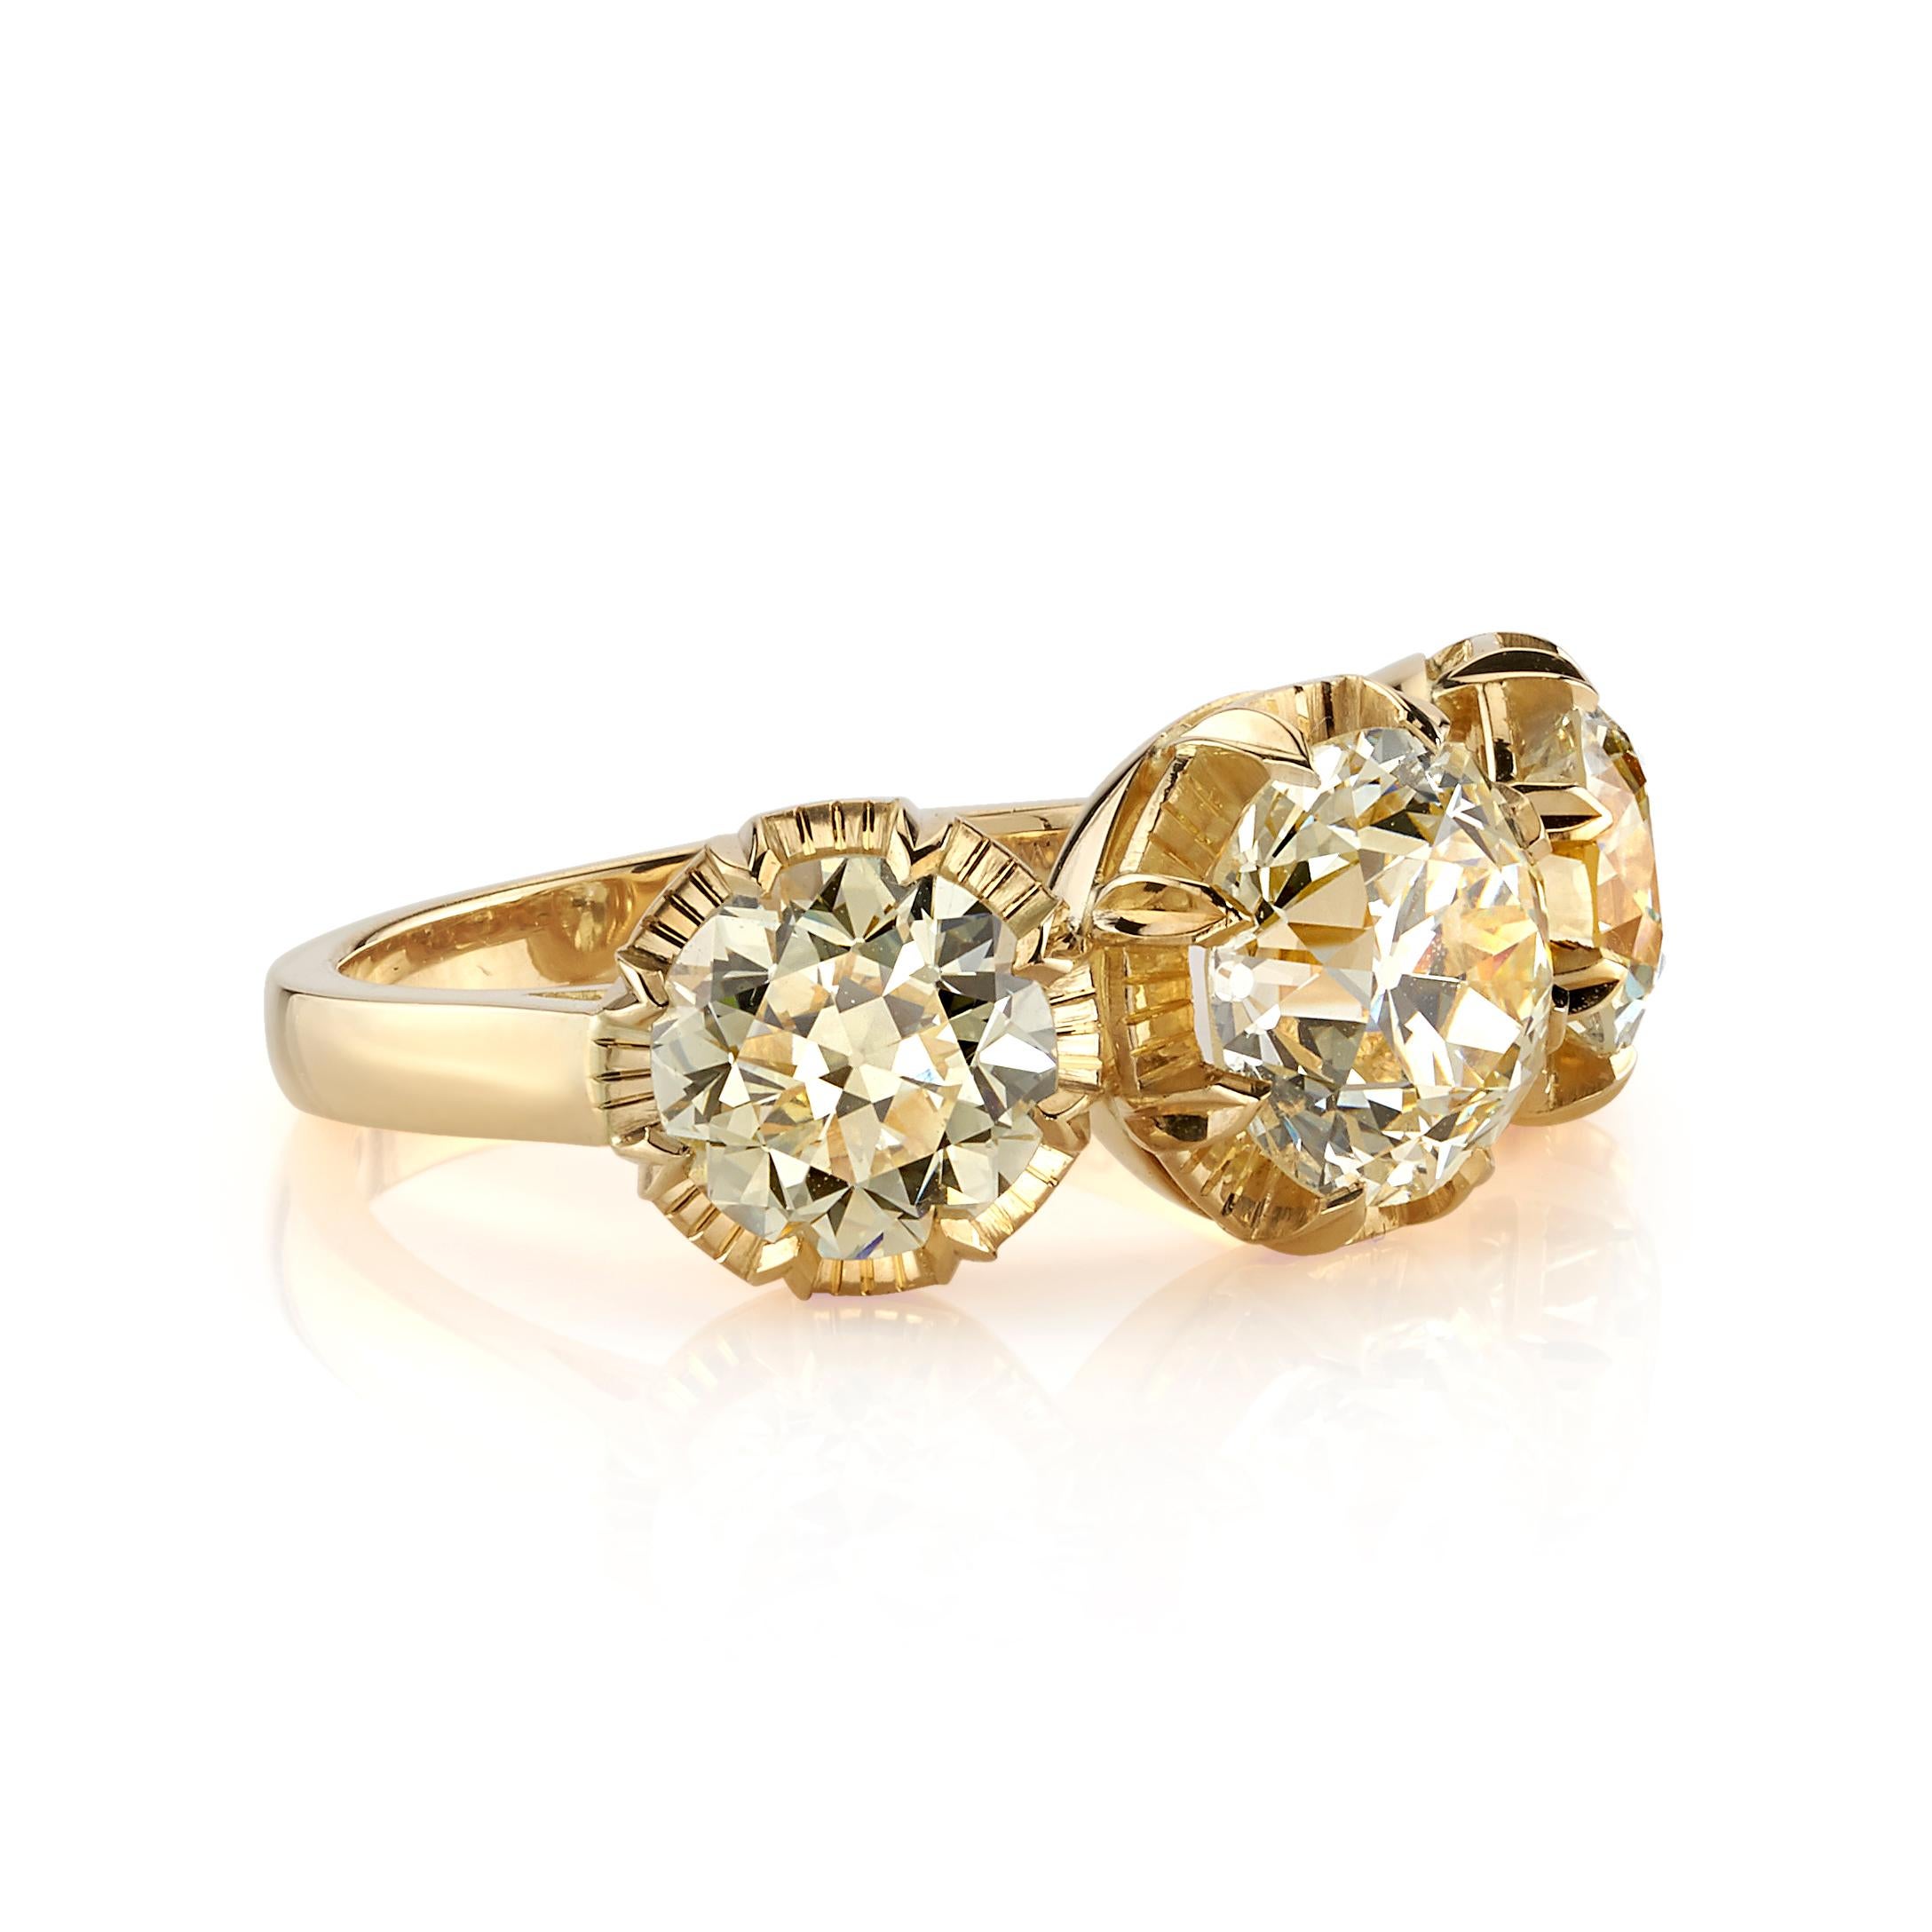 1.73ct QR/VVS2 GIA certified old European cut diamond with 2.06ctw accent diamonds set in a handcrafted 18K yellow gold mounting. Ring is currently a size 6 and can be sized to fit. 